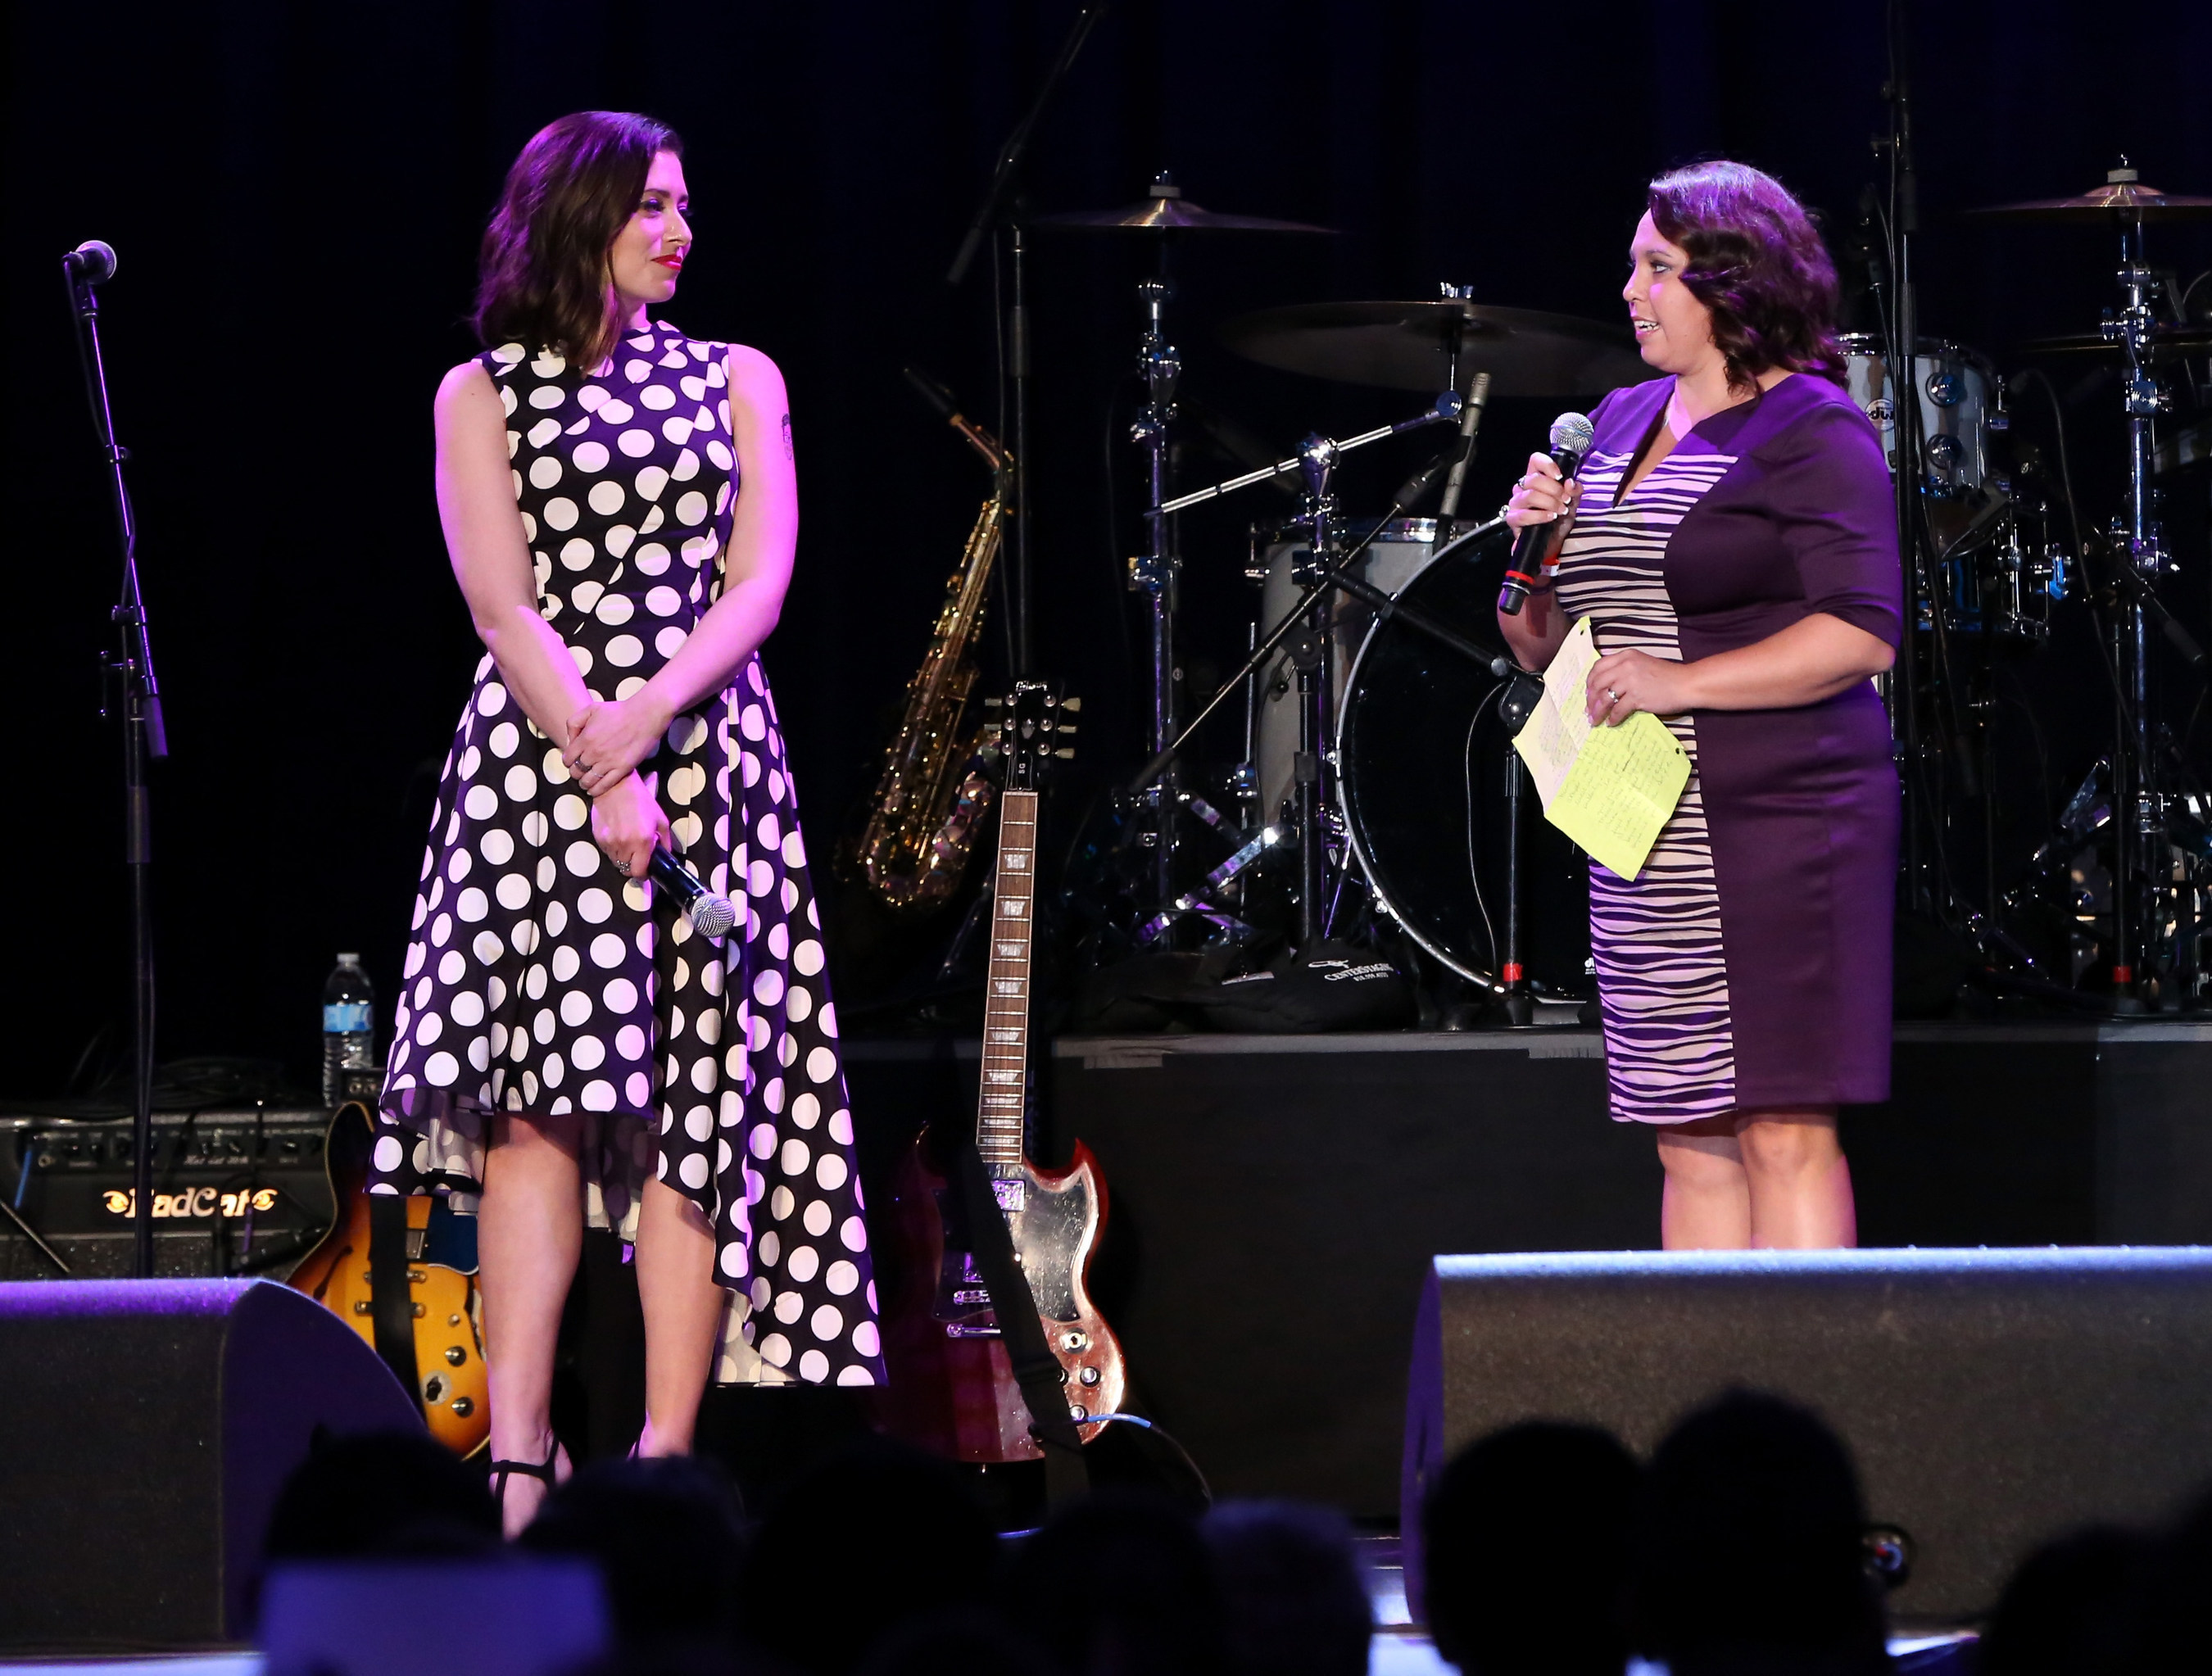 LOS ANGELES, CA - OCTOBER 17: Hilarity for Charity co-founder Lauren Miller-Rogen (L) and Nikki Dodson speak onstage during Hilarity for Charity's annual variety show: James Franco's Bar Mitzvah, benefiting the Alzheimer's Association, presented by Funny or Die, go90 and SVEDKA Vodka at the Hollywood Palladium on October 17, 2015 in Los Angeles, California. (Photo by Jonathan Leibson/Getty Images for SVEDKA Vodka)